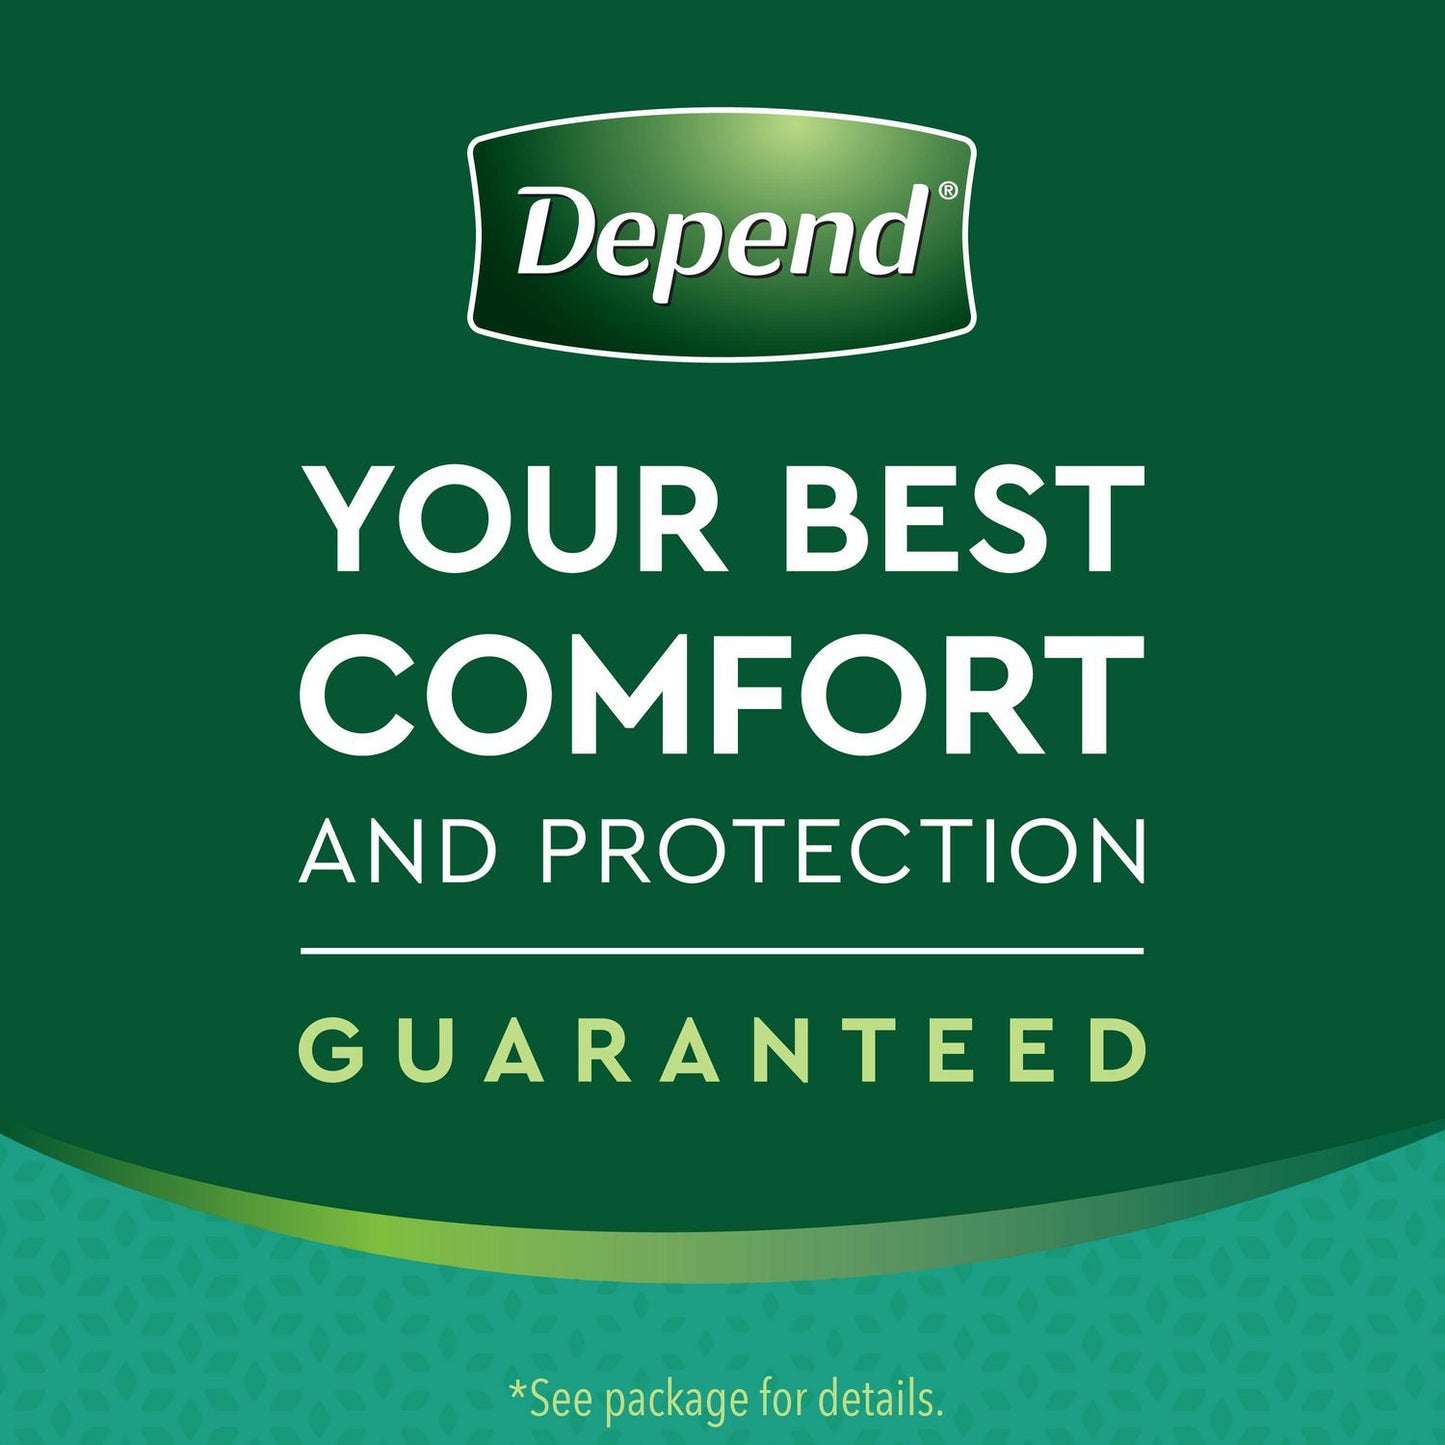 Buy Depend FIT-FLEX Incontinence Underwear for Women, Disposable